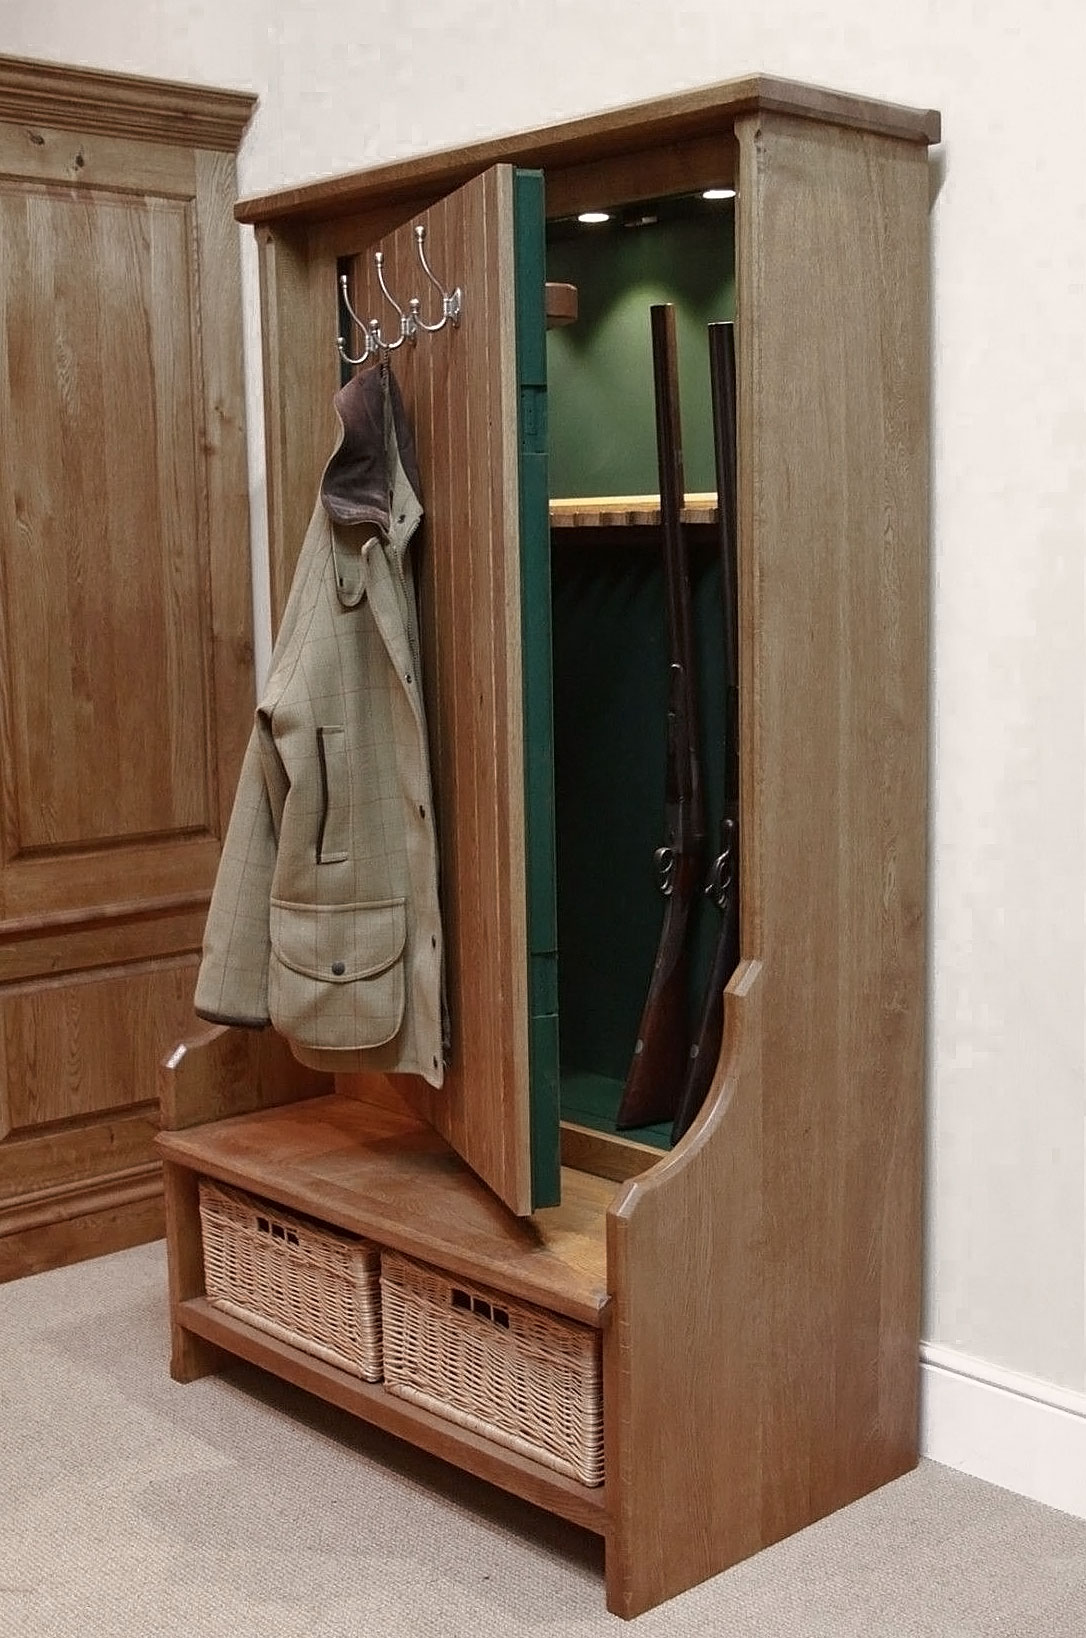 Turning a closet into a gun safe - is it safe? photo 1